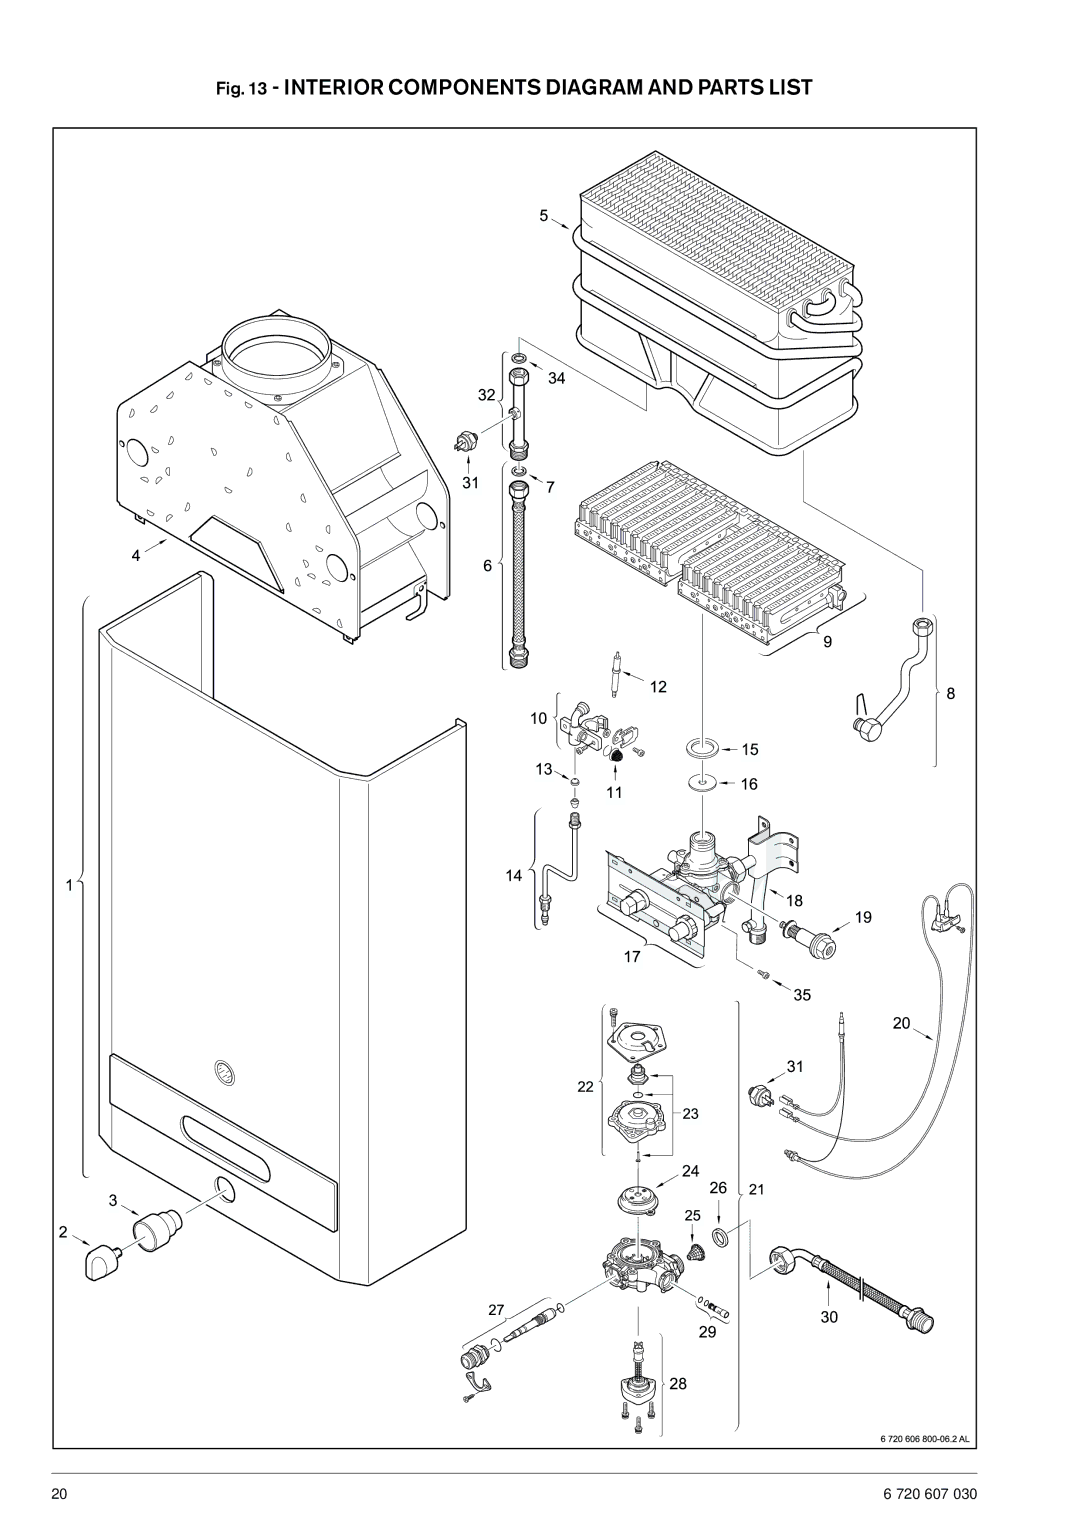 Bosch Appliances 125B NG, 125B LP specifications Interior Components Diagram and Parts List 